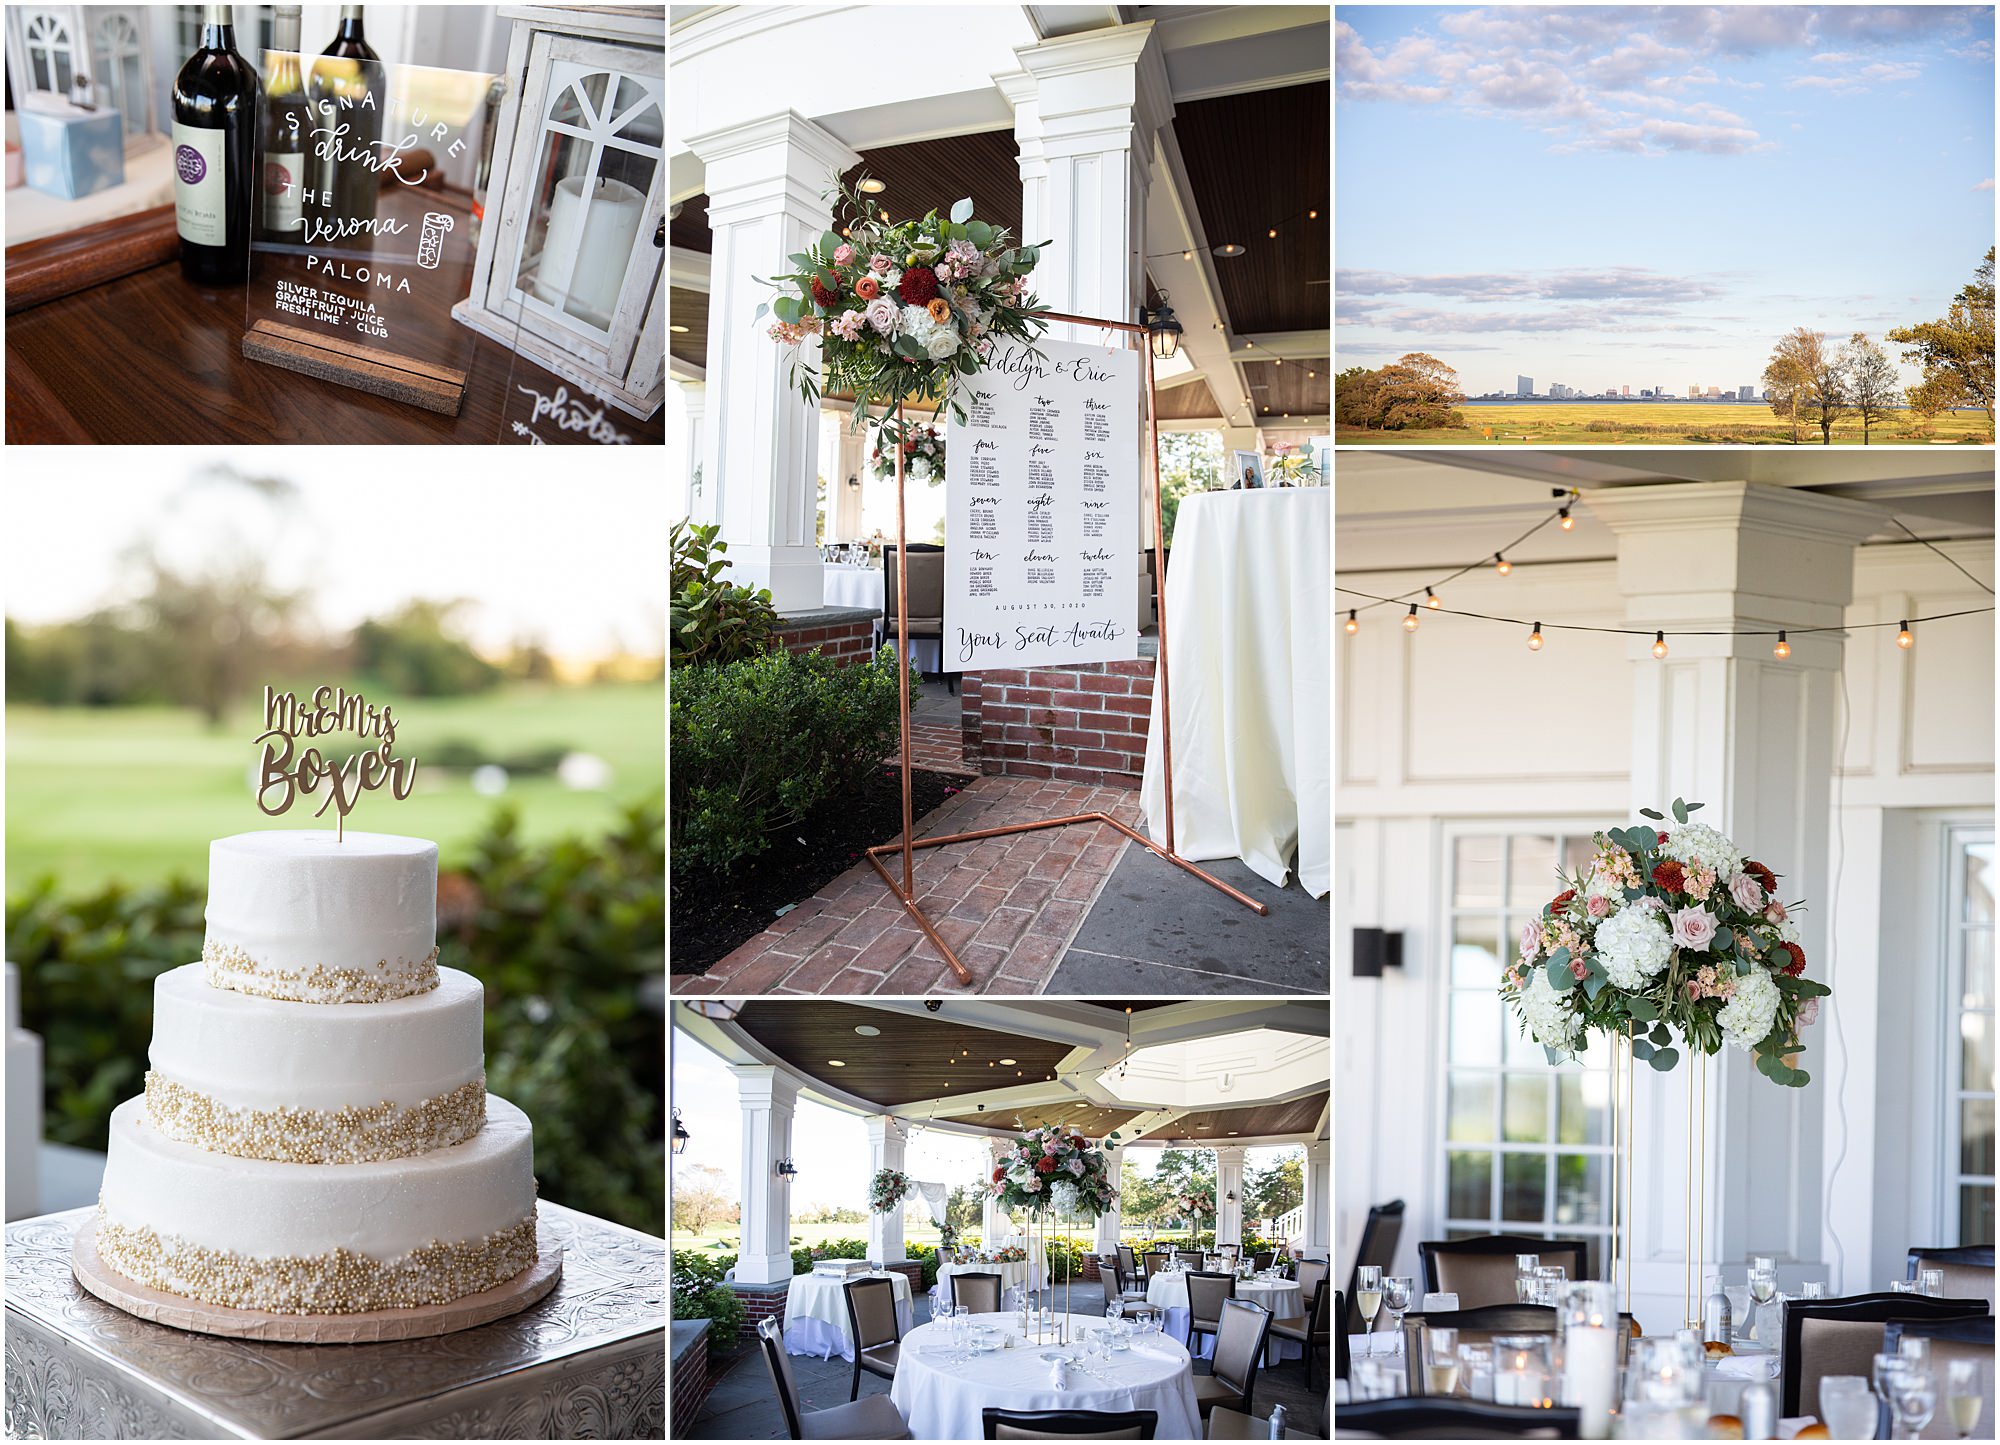 Details of an outdoor wedding at the Atlantic City Country Club